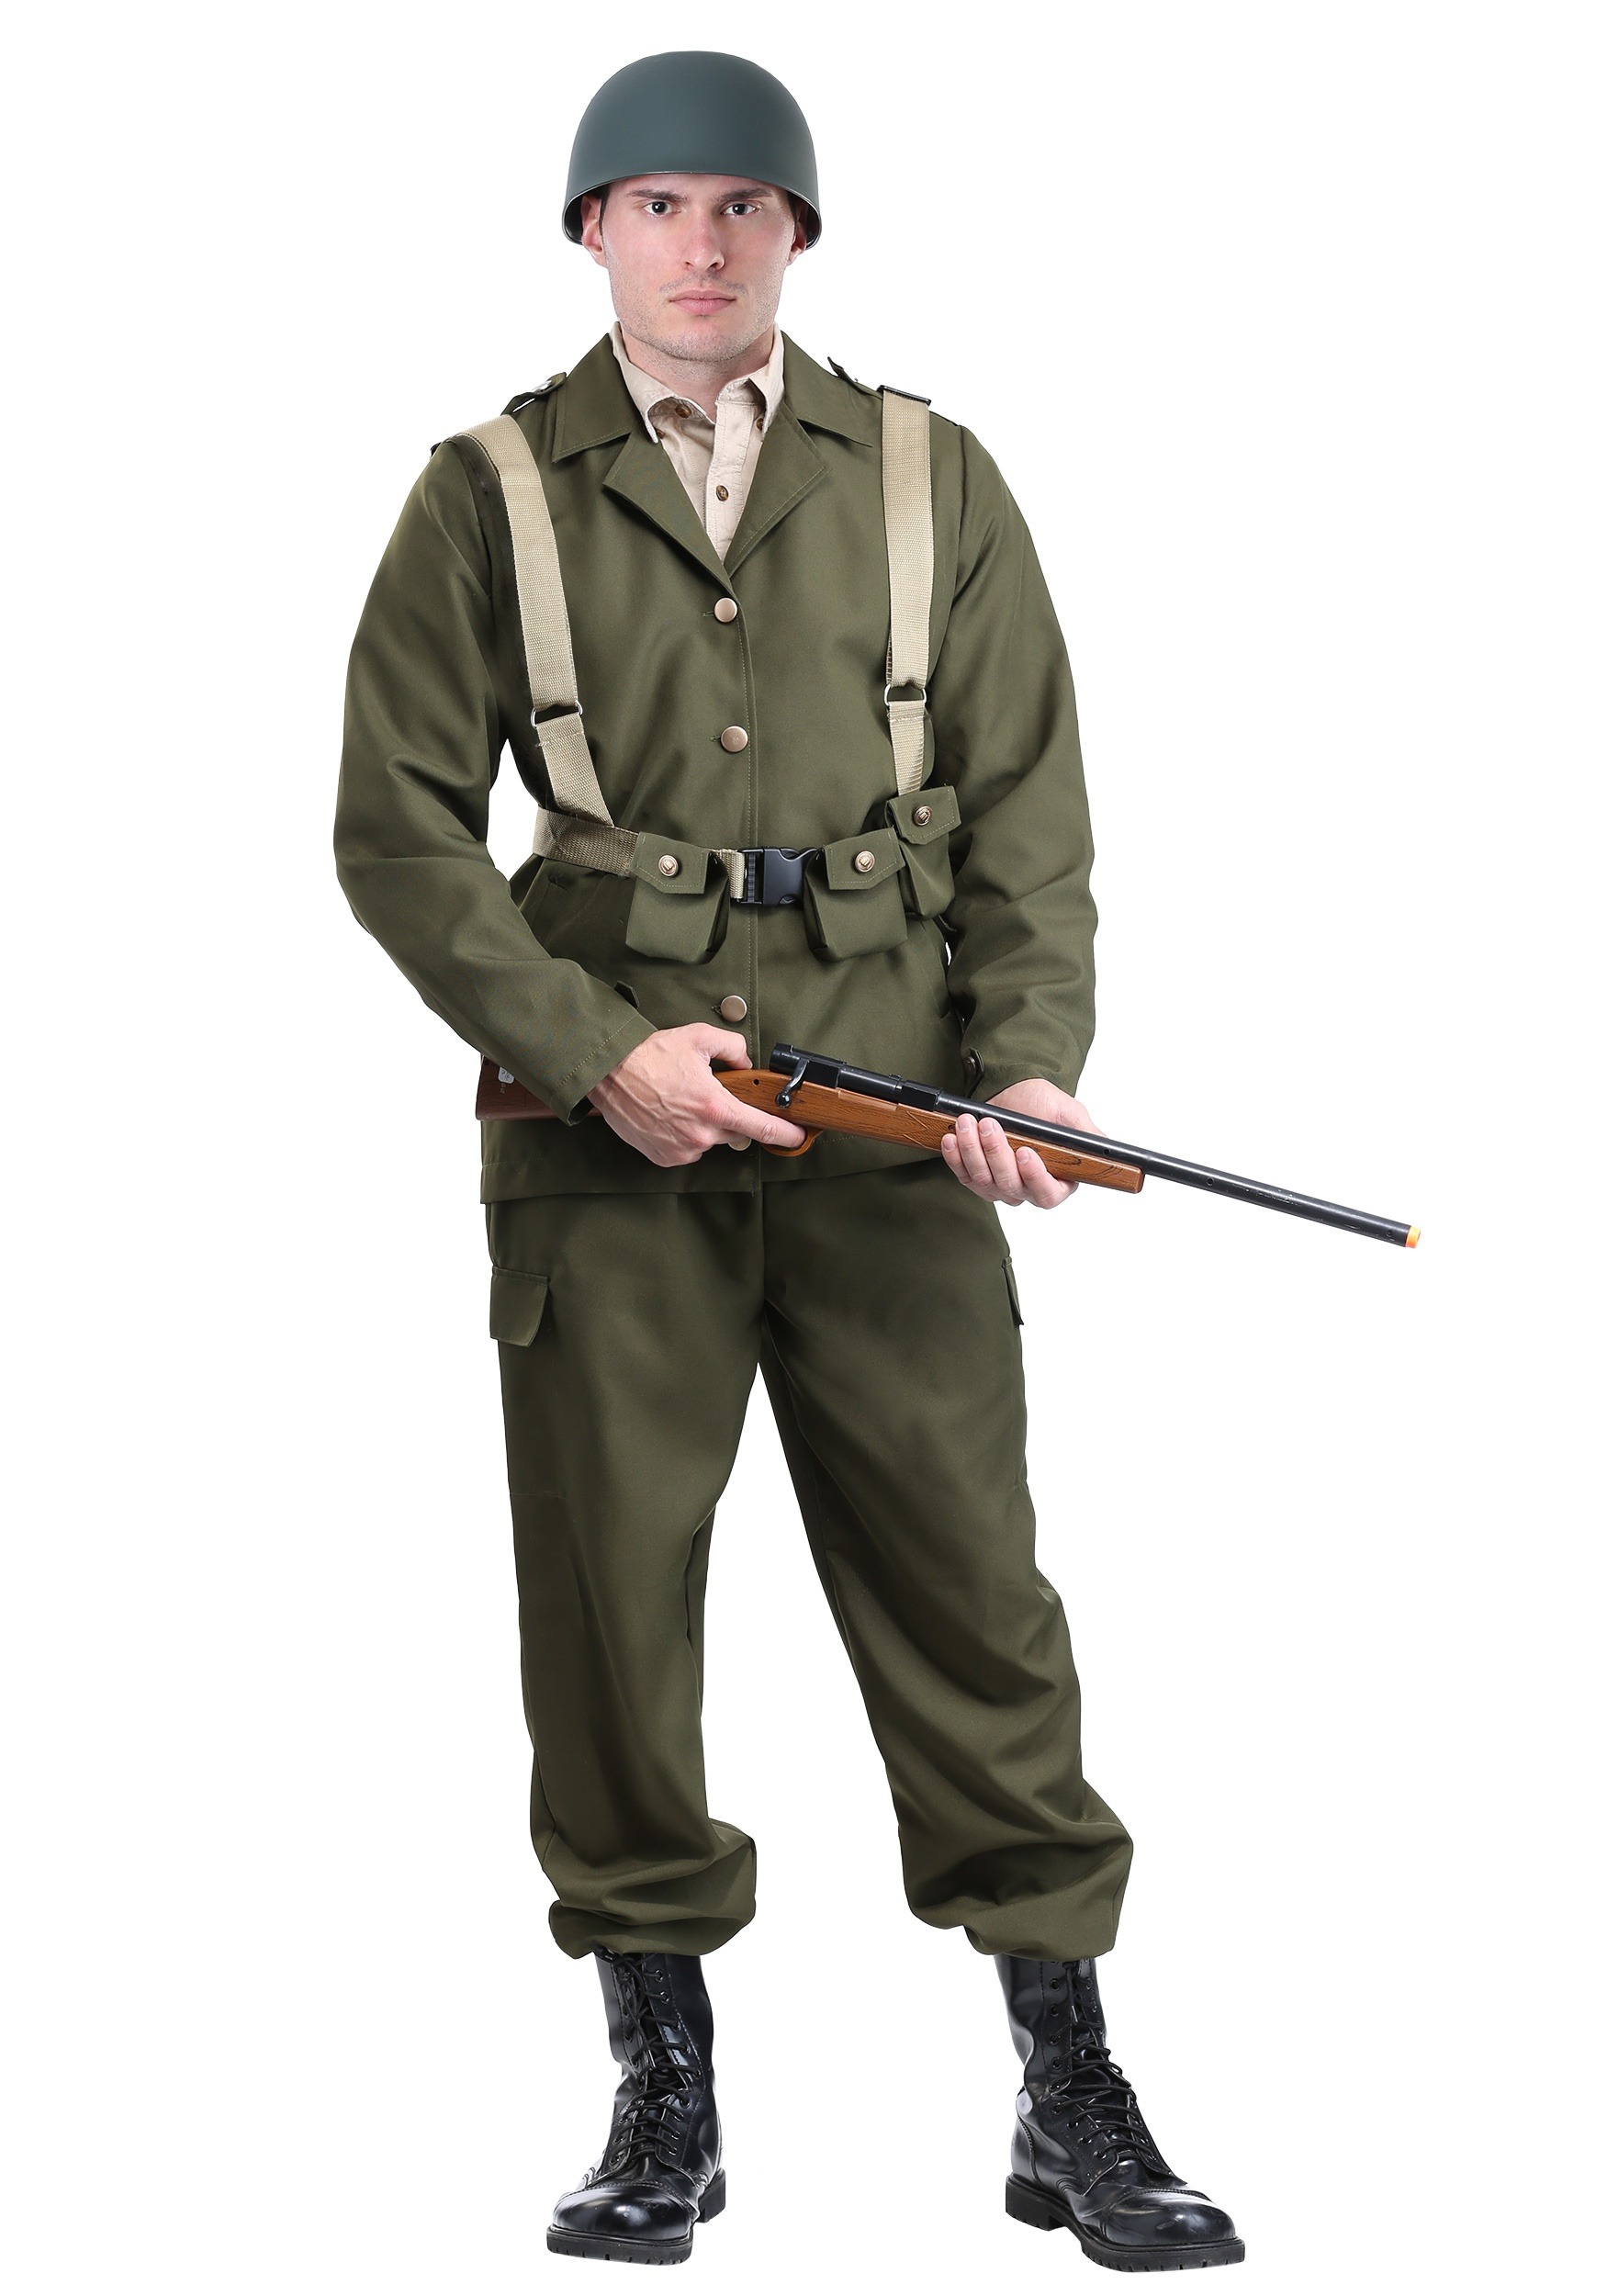 Wwii Kids Army Soldier Costume With Hat Military Halloween Cosplay